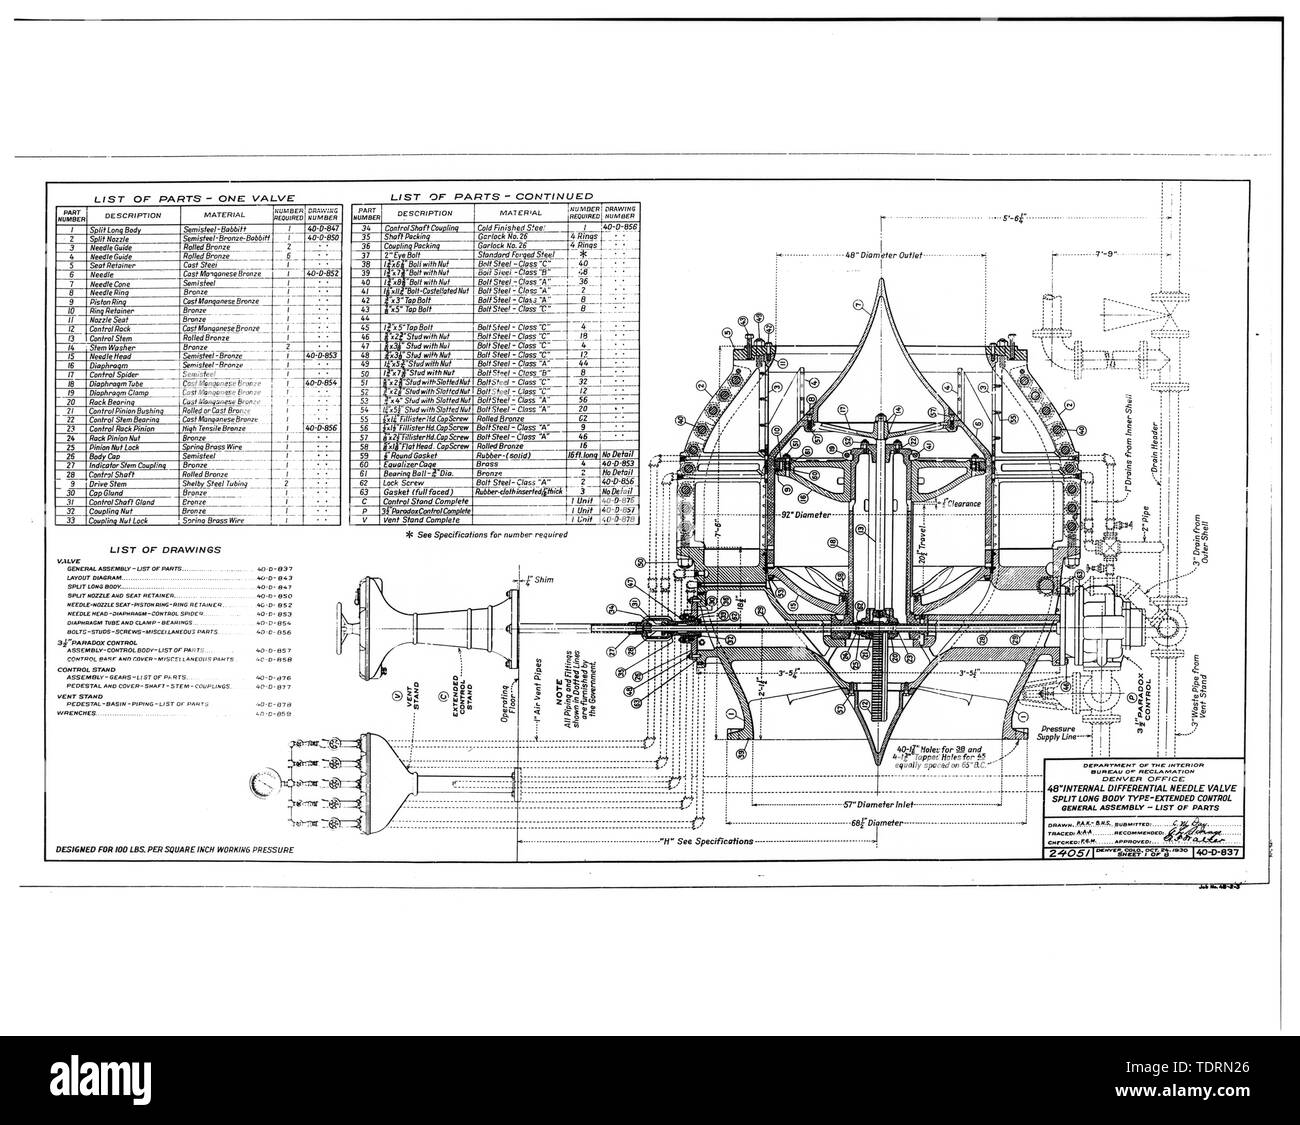 Photographic copy of original construction drawing dated October 24, 1930 (from Record Group 115, Denver Branch of the National Archives, Denver). 48 INTERNAL DIFFERENTIAL NEEDLE VALVE, SPLIT LONG BODY TYPE-EXTENDED CONTROL, GENERAL ASSEMBLY-LIST OF PARTS. - Owyhee Dam, Across Owyhee River, Nyssa, Malheur County, OR Stock Photo